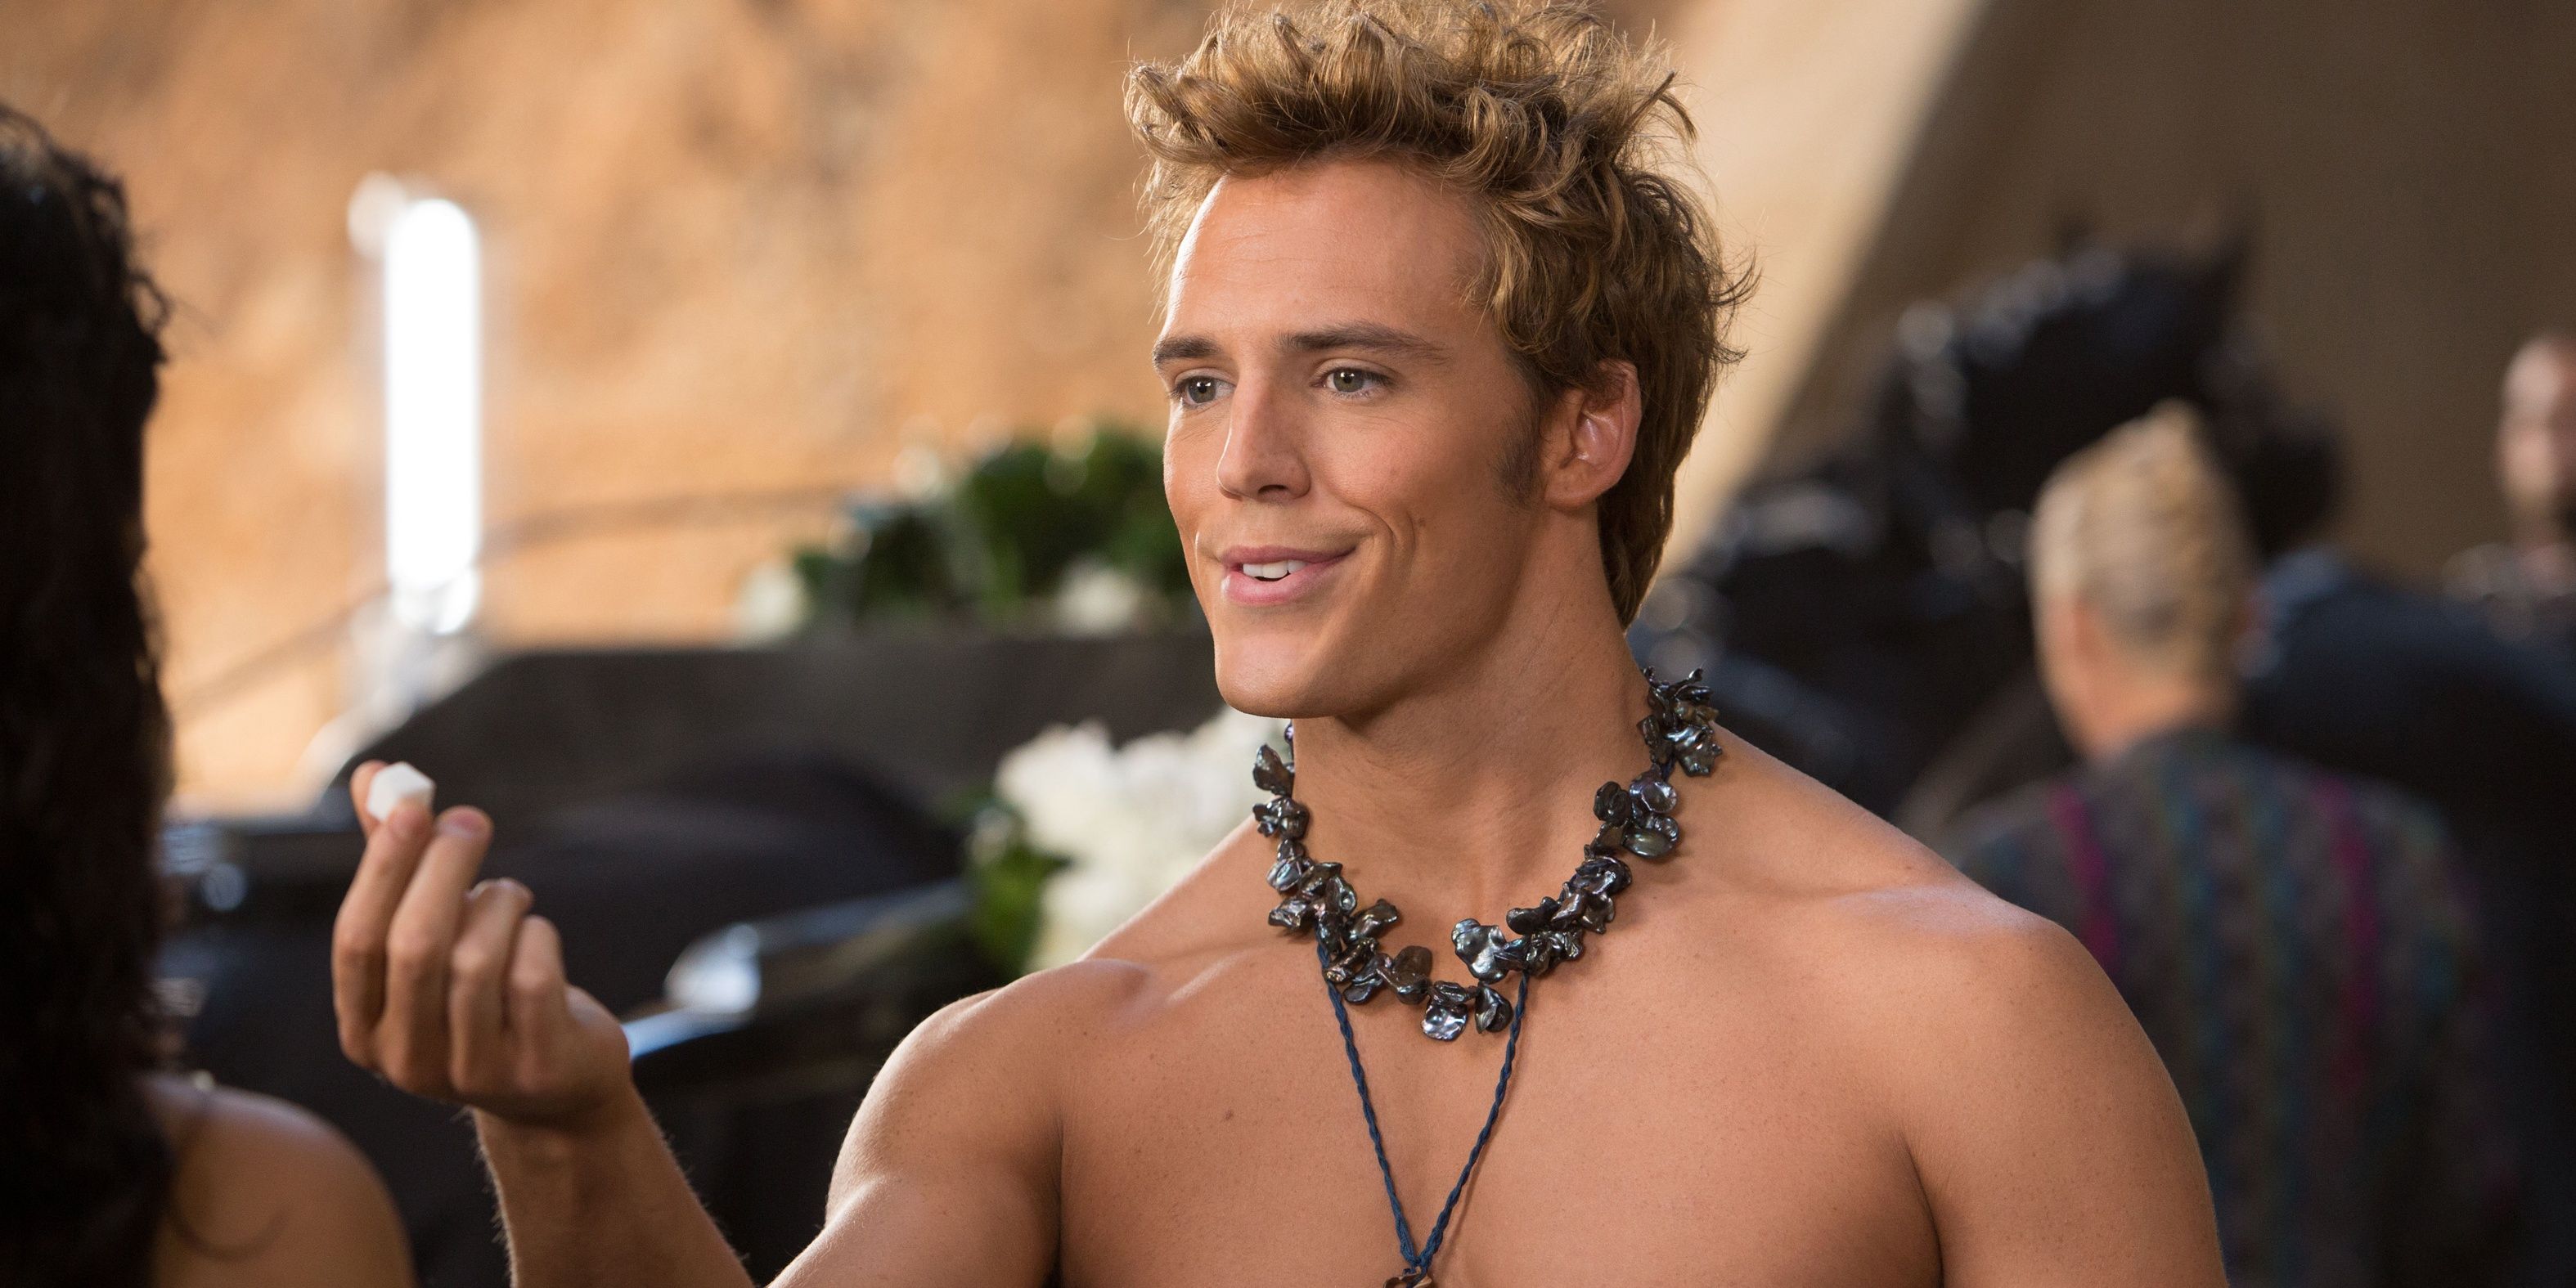 Finnick offering a sugar cube in The Hunger Games: Catching Fire.